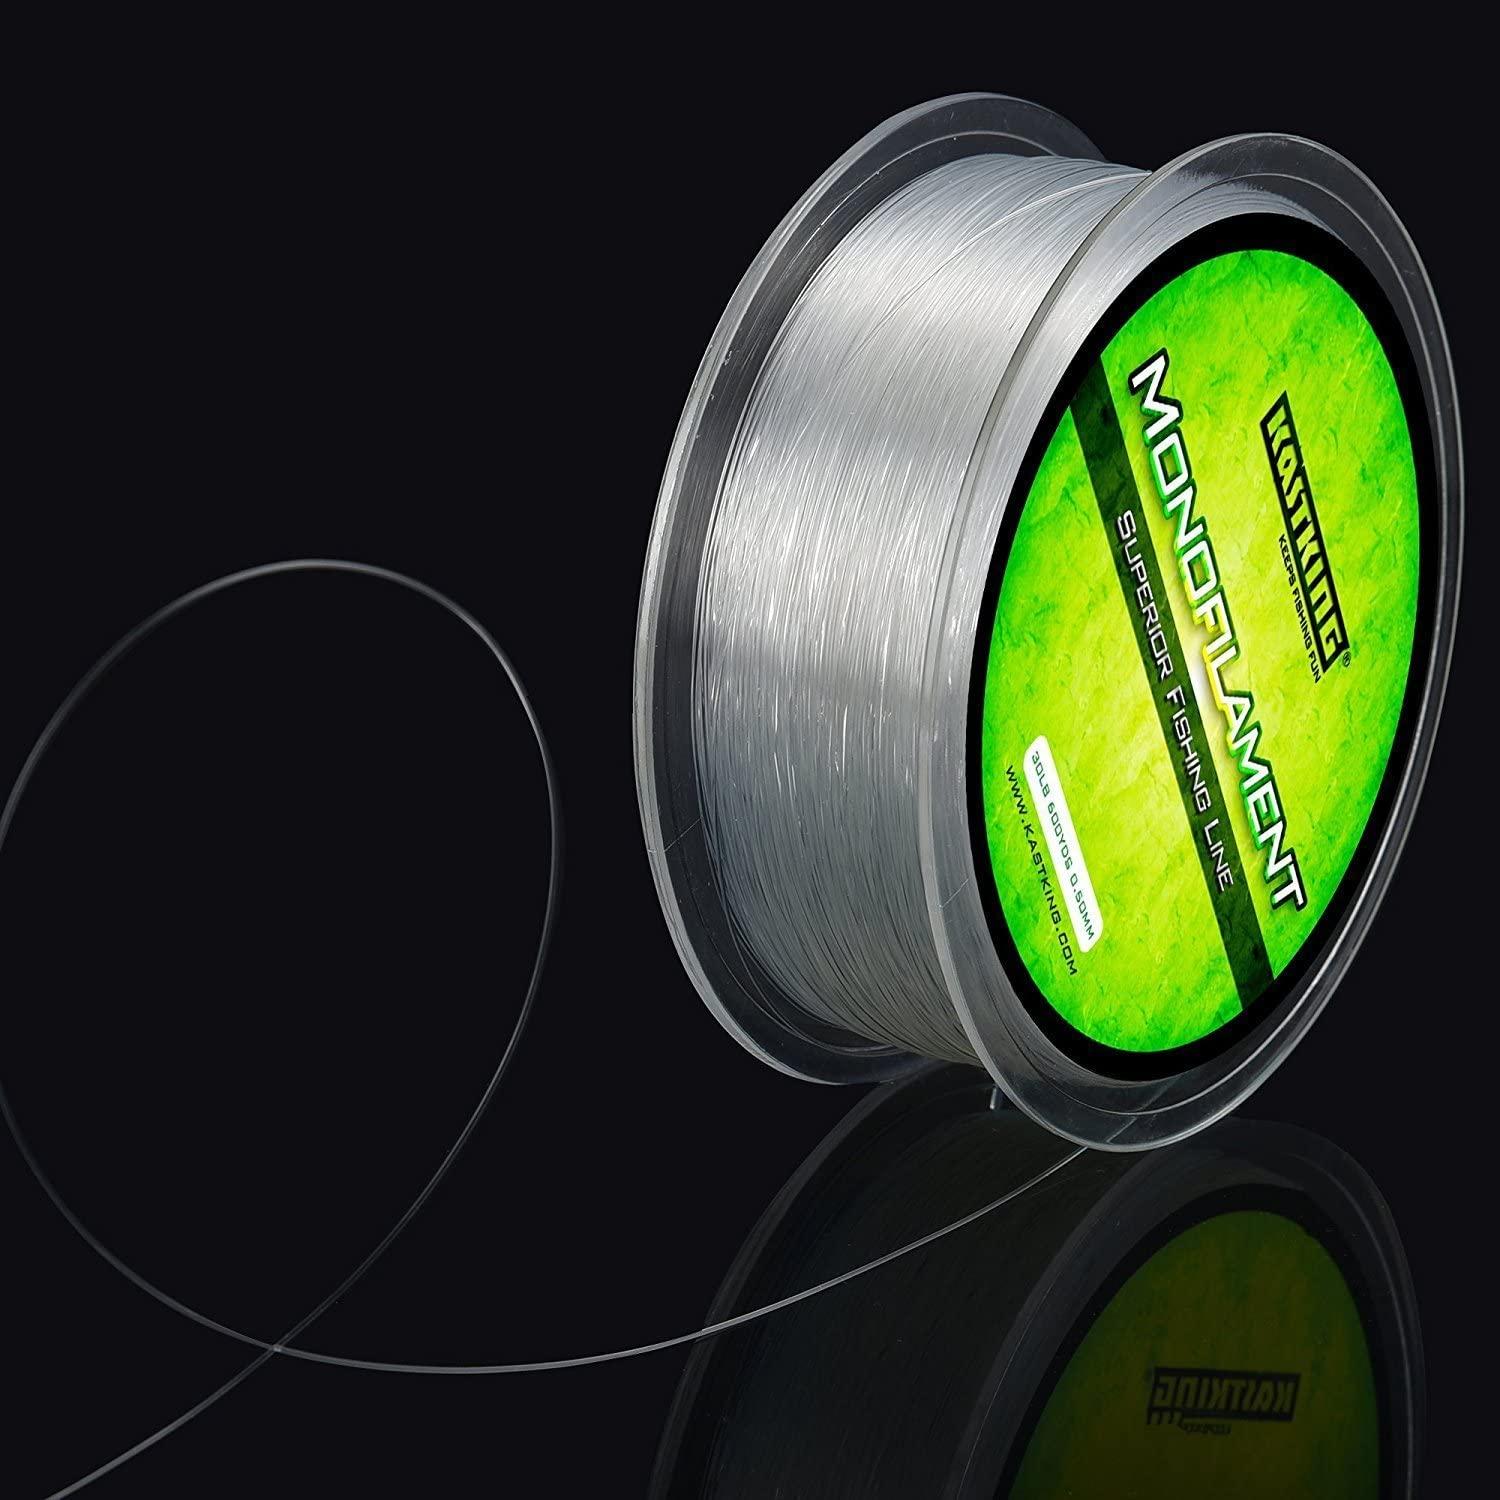 KastKing World's Premium Monofilament Fishing Line - Paralleled Roll Track  - Strong and Abrasion Resistant Mono Line - Superior Nylon Material Fishing  Line - 2015 ICAST Award Winning Manufacturer 300Yds/4LB Ice Clear